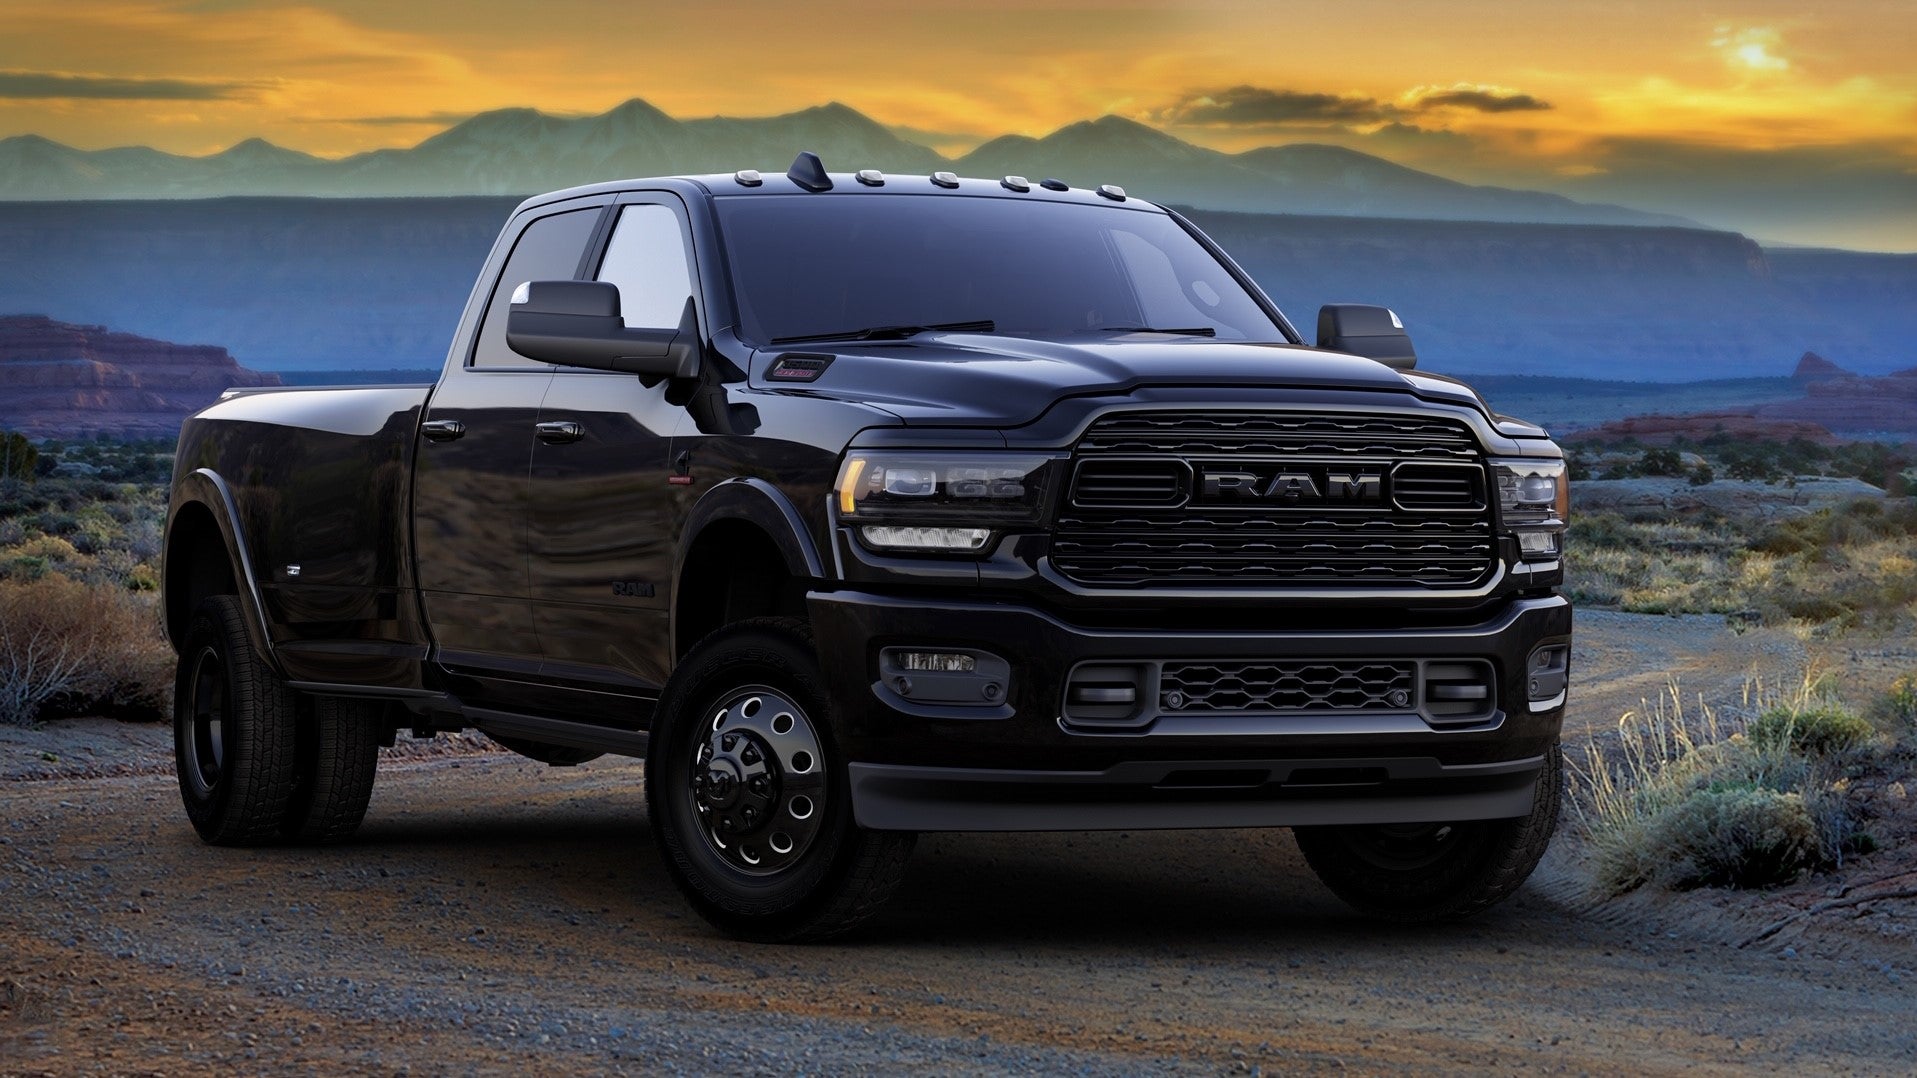 21 Ram 1500 And Hd Limited Night Edition When You Want Your Truck To Look Like A Grand Piano